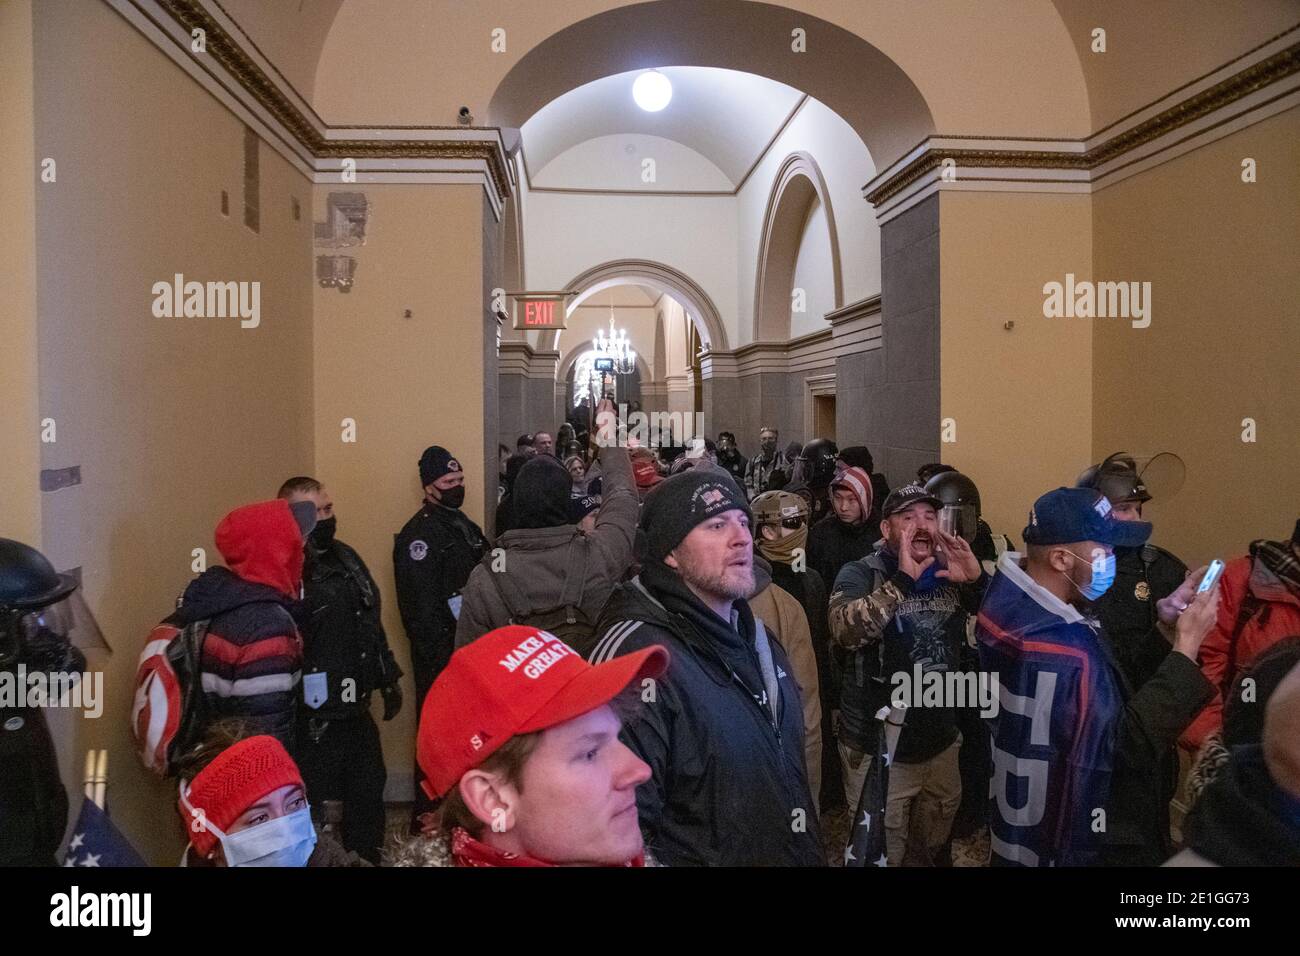 Washington, USA. 06th Jan, 2021. Supporters of President Trump storm the United States Capitol building in Washington, DC on January 6, 2021. The joint session of the House and Senate was sent to recess after the breach as it convened to confirm the Electoral College votes cast in November's election. (Photo by Matthew Rodier/Sipa USA) Credit: Sipa USA/Alamy Live News Stock Photo